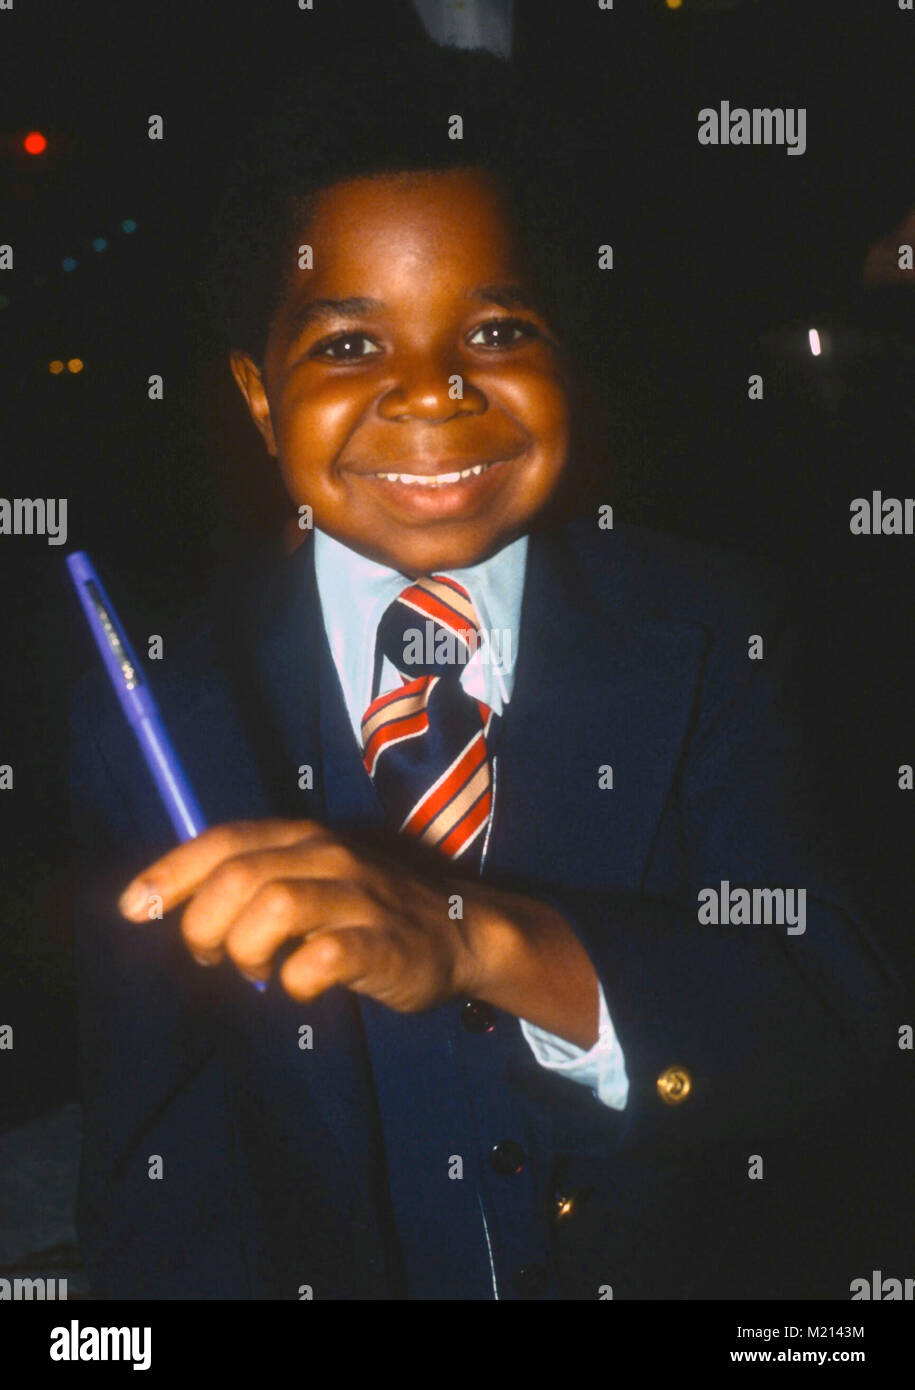 WEST HOLLYWOOD, CA - MAY 17:  Actor Gary Coleman  attends NBC party at Chasen's on May 17, 1981 in West Hollywood, California. Photo by Barry King/Alamy Stock Photo Stock Photo